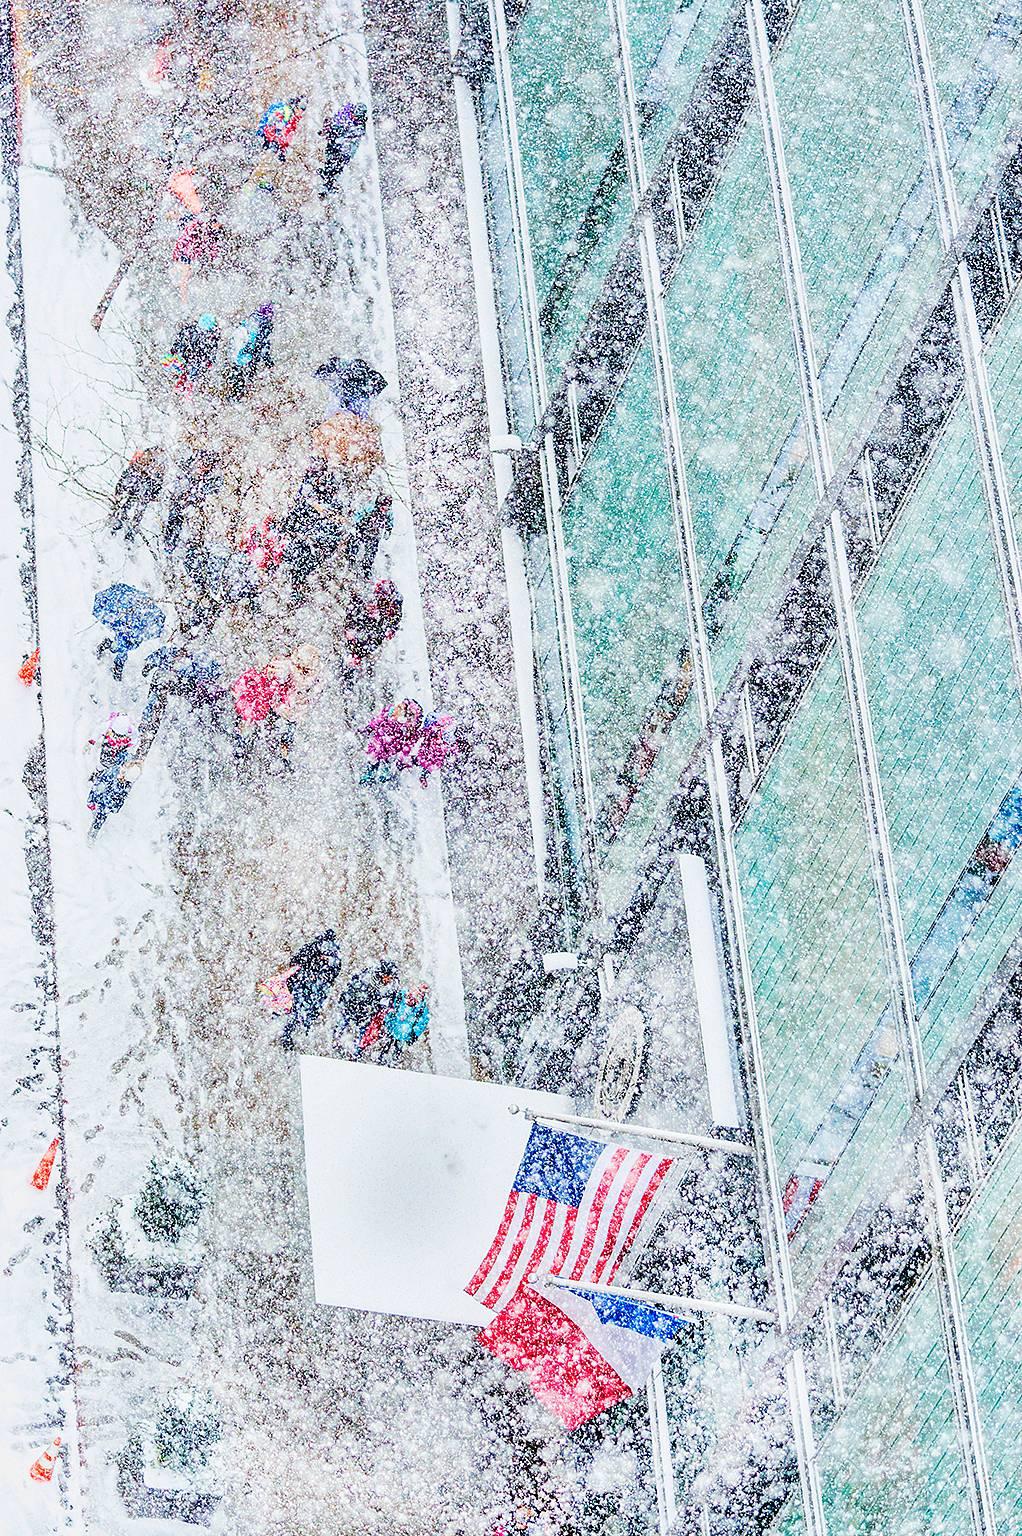 Mitchell Funk Landscape Photograph - New York City Snow Scene with American Flag